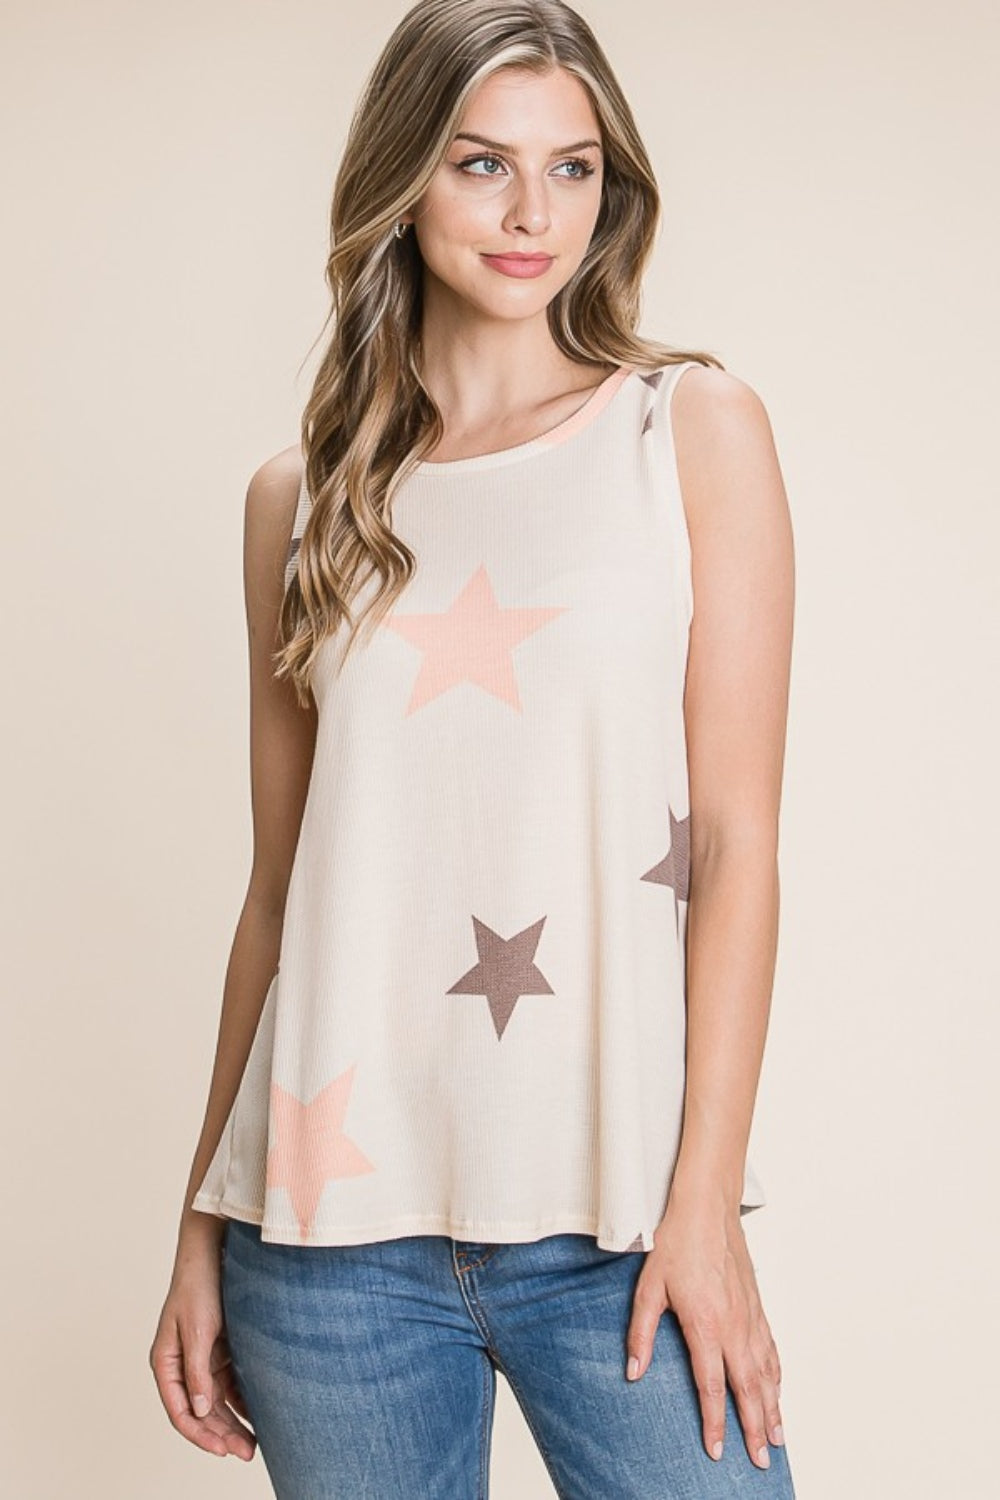 BOMBOM Star Print Round Neck Tank-Tank Tops-Inspired by Justeen-Women's Clothing Boutique in Chicago, Illinois